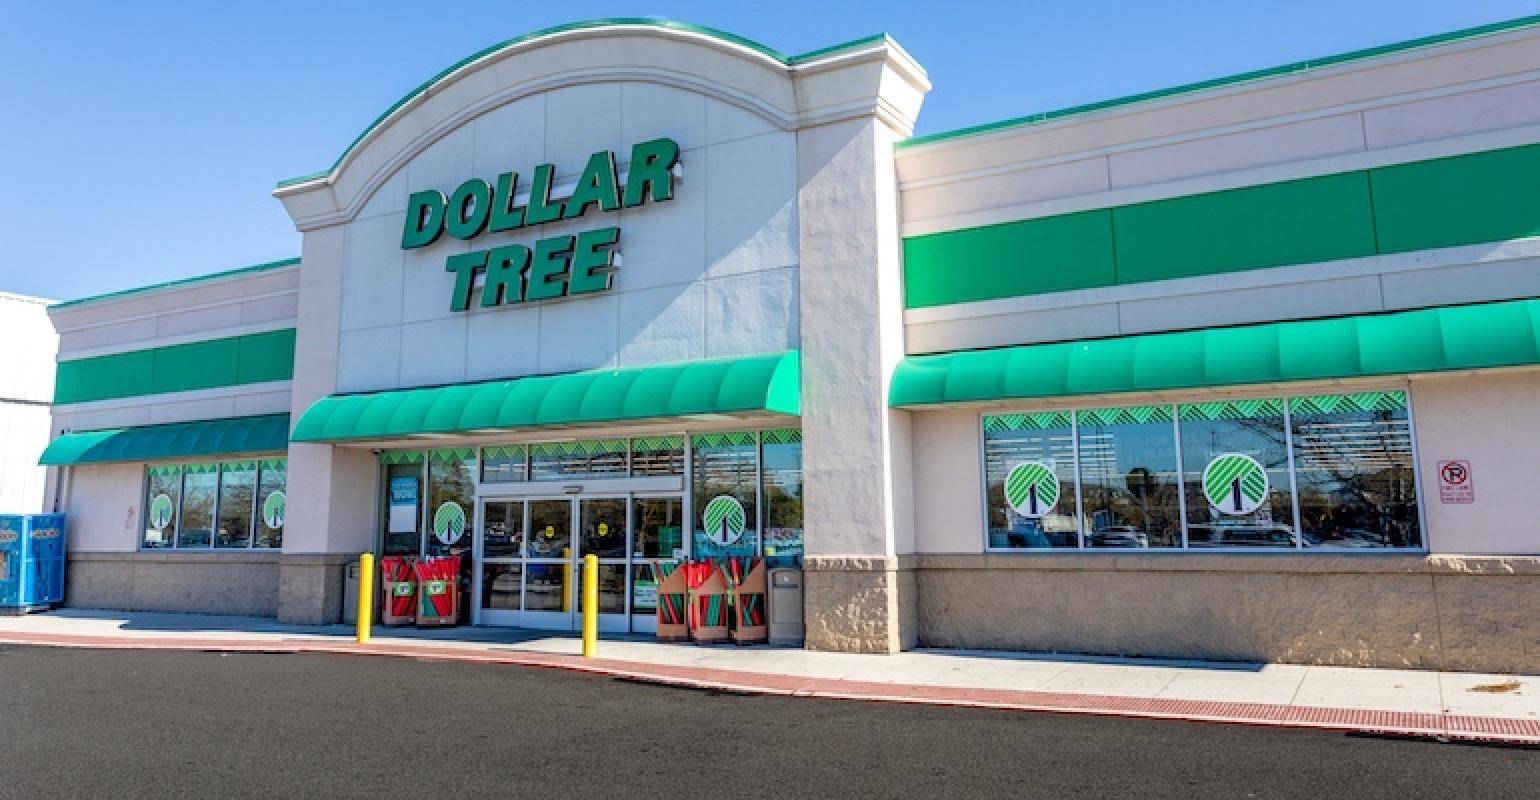 Best things to buy at dollar tree for this winter